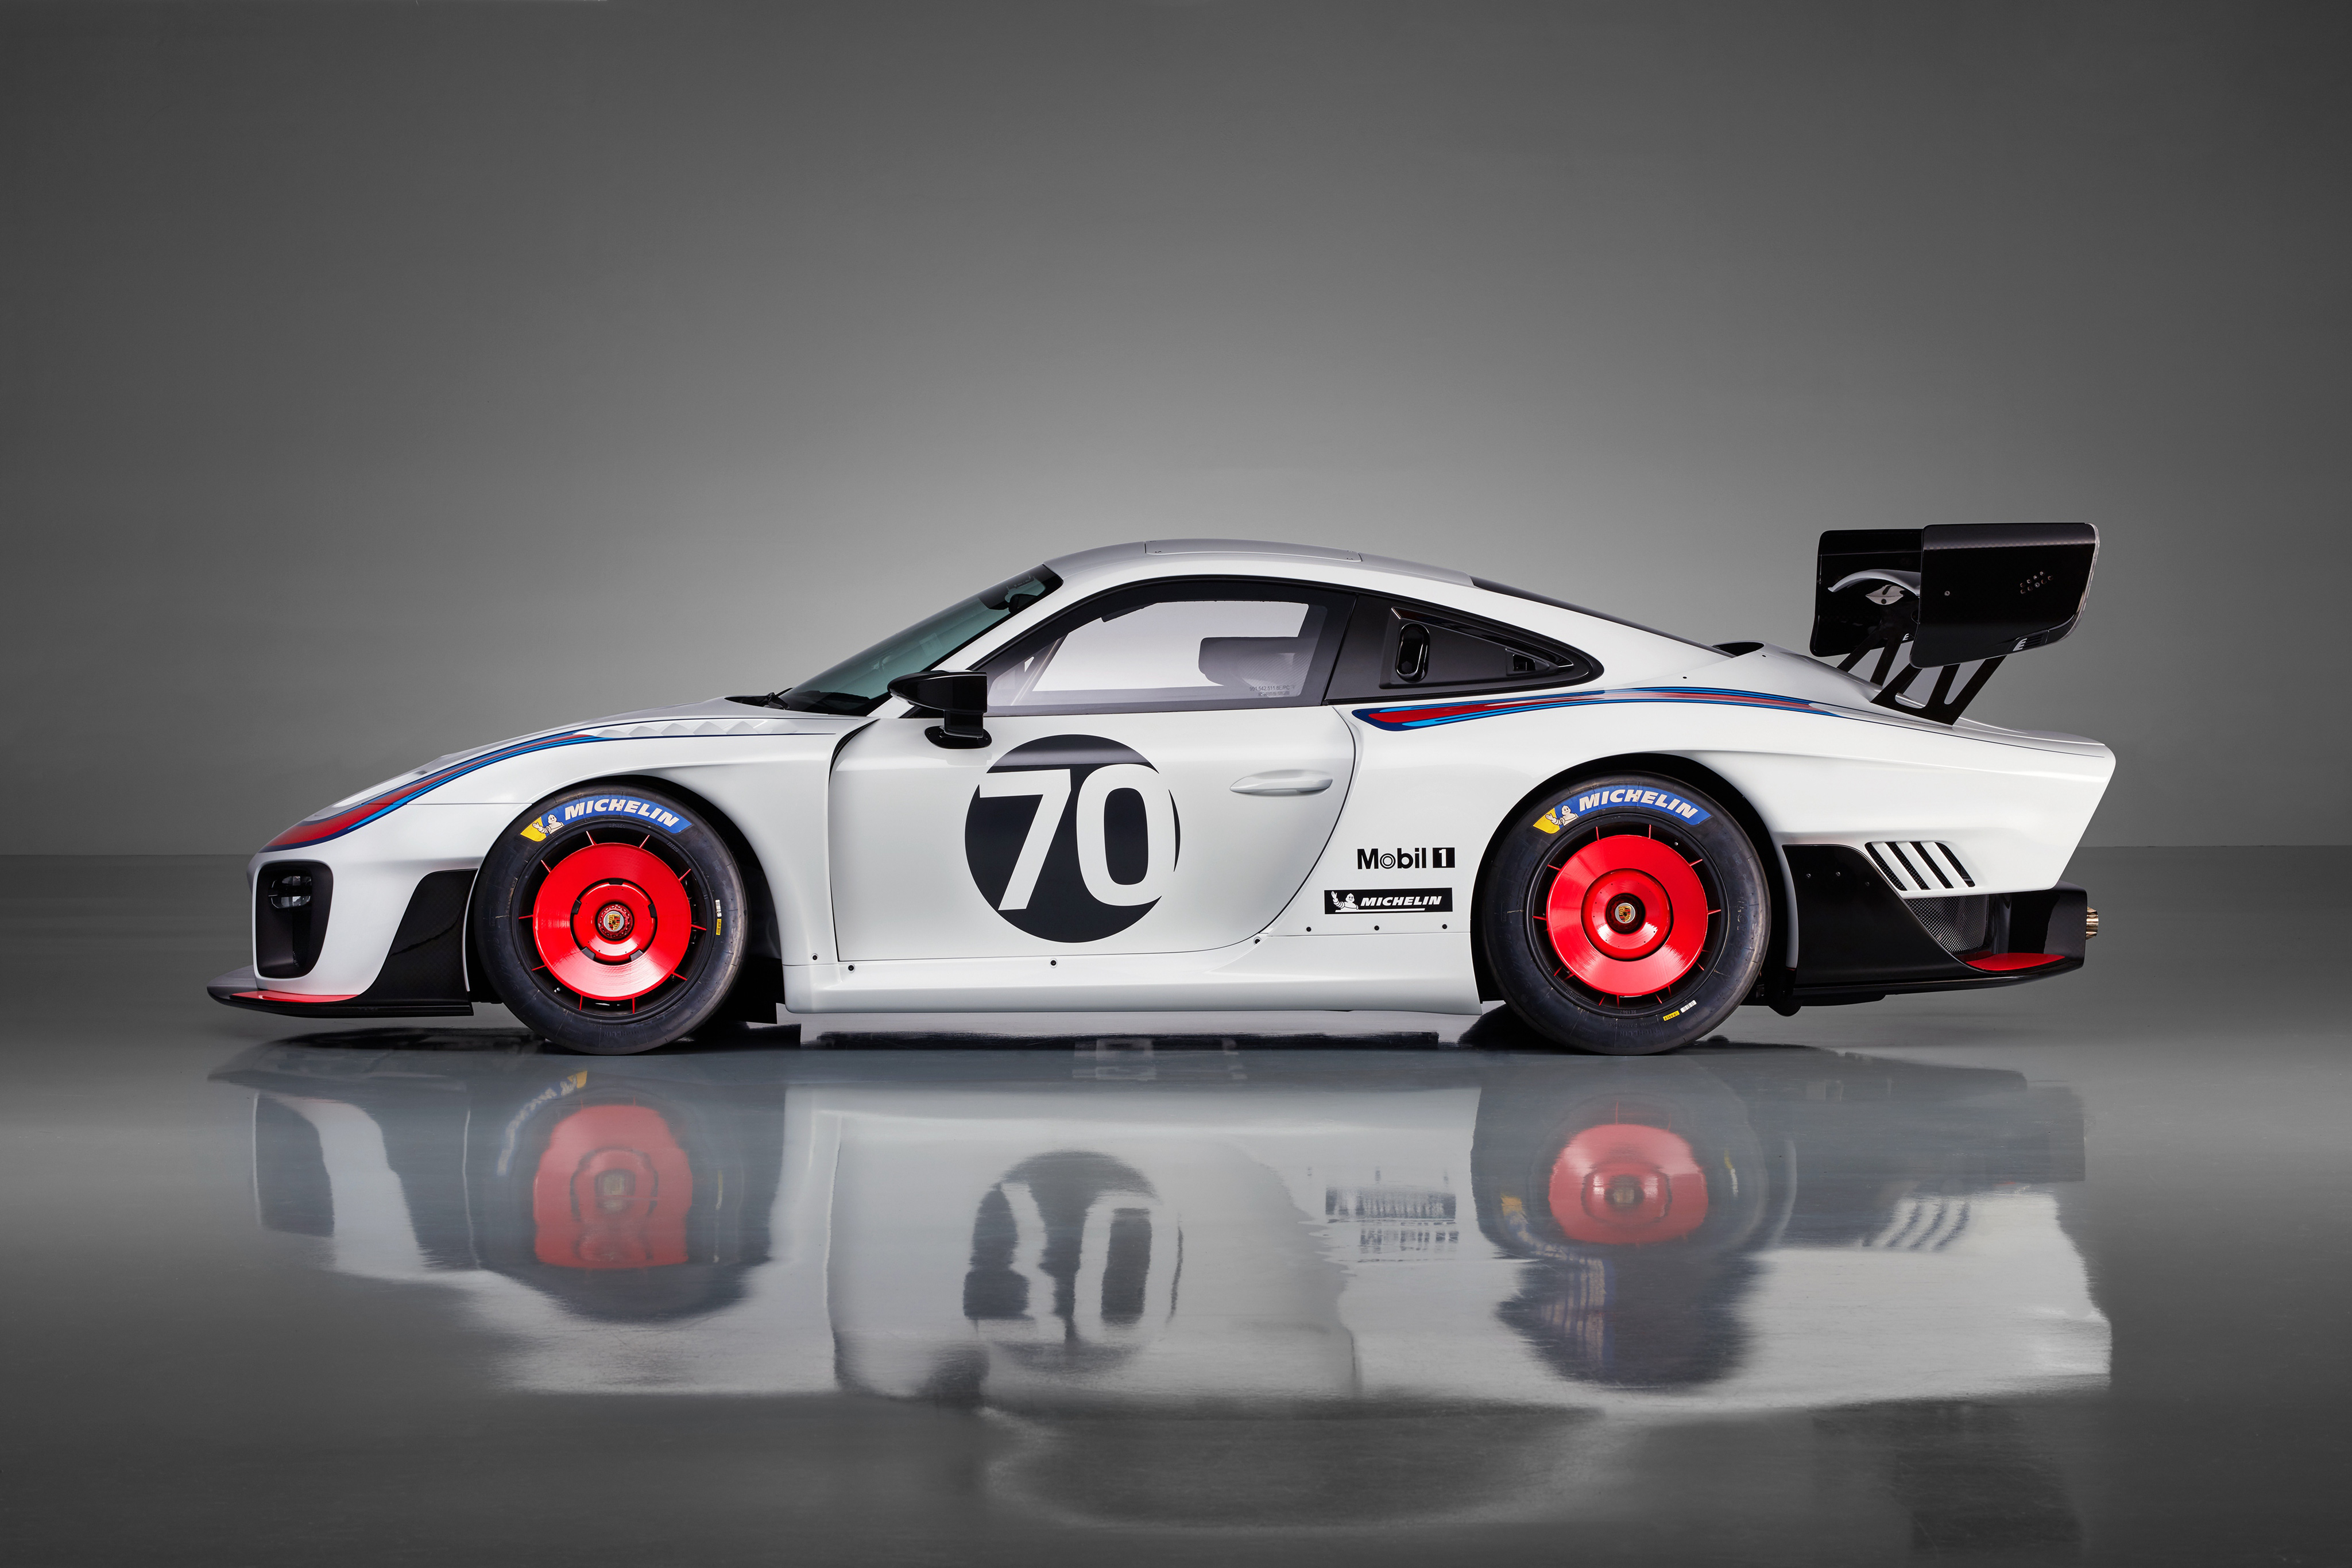 Porsche 935 2019 Side View, HD Cars, 4k Wallpapers, Images ...